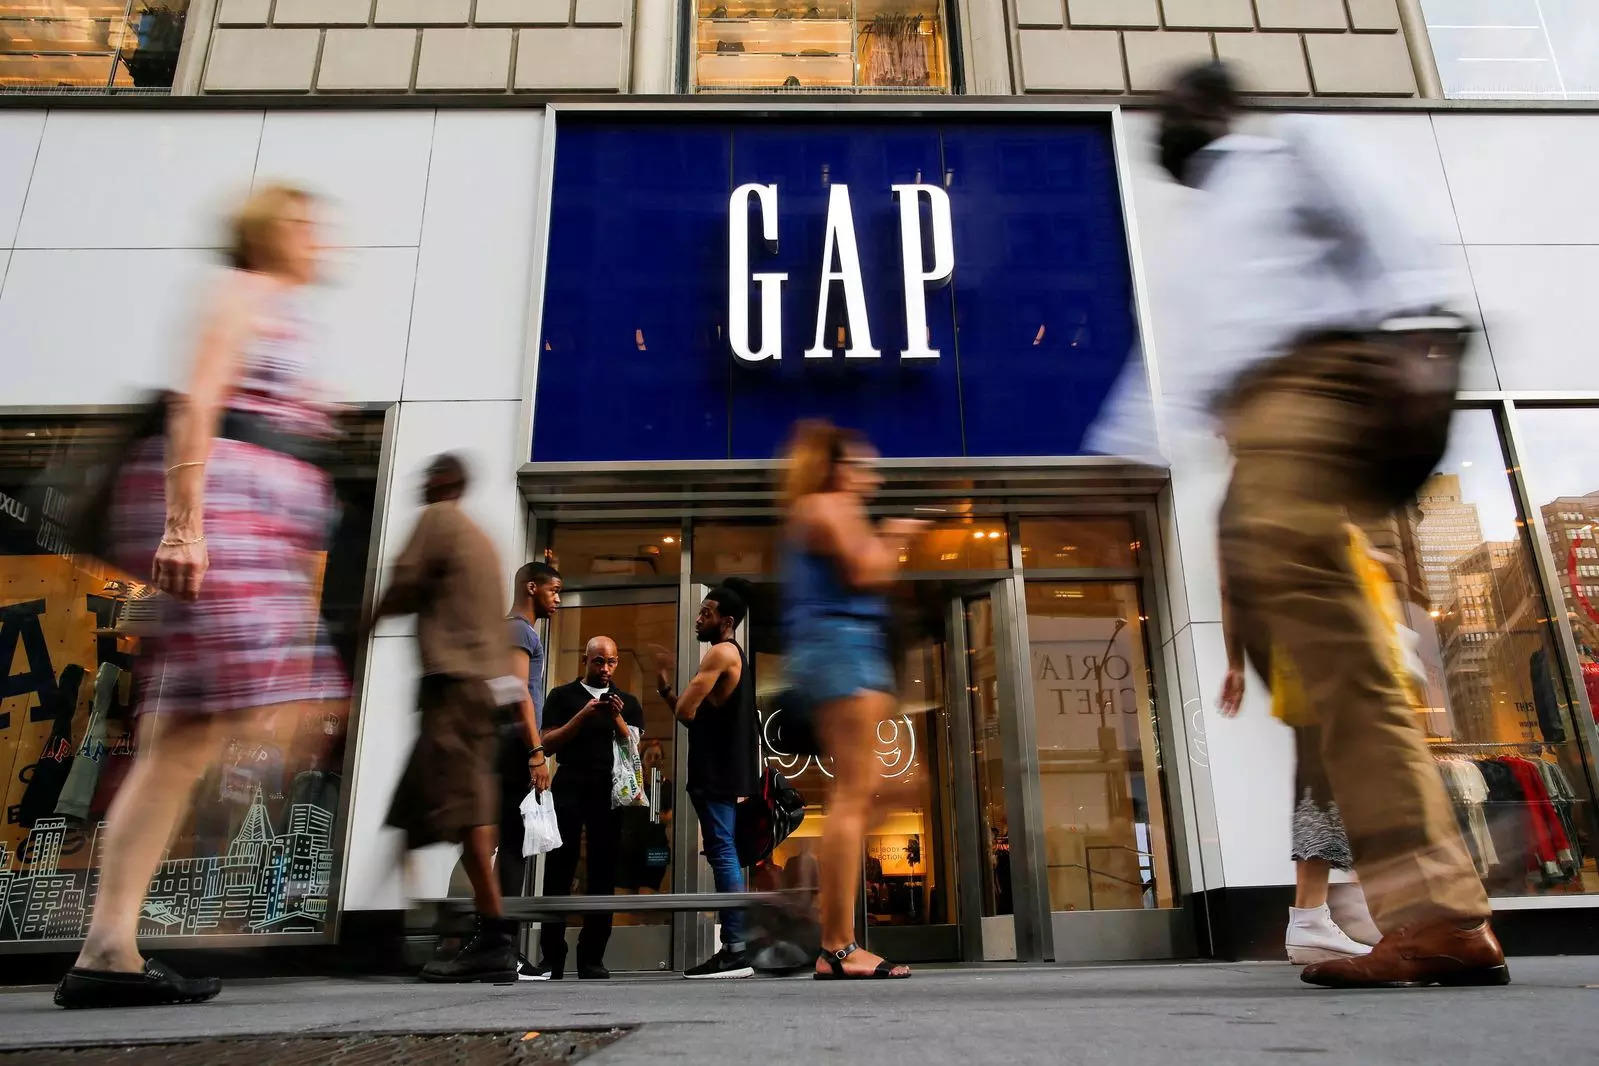 Gap expects strong earnings as apparel demand rebounds, shares jump